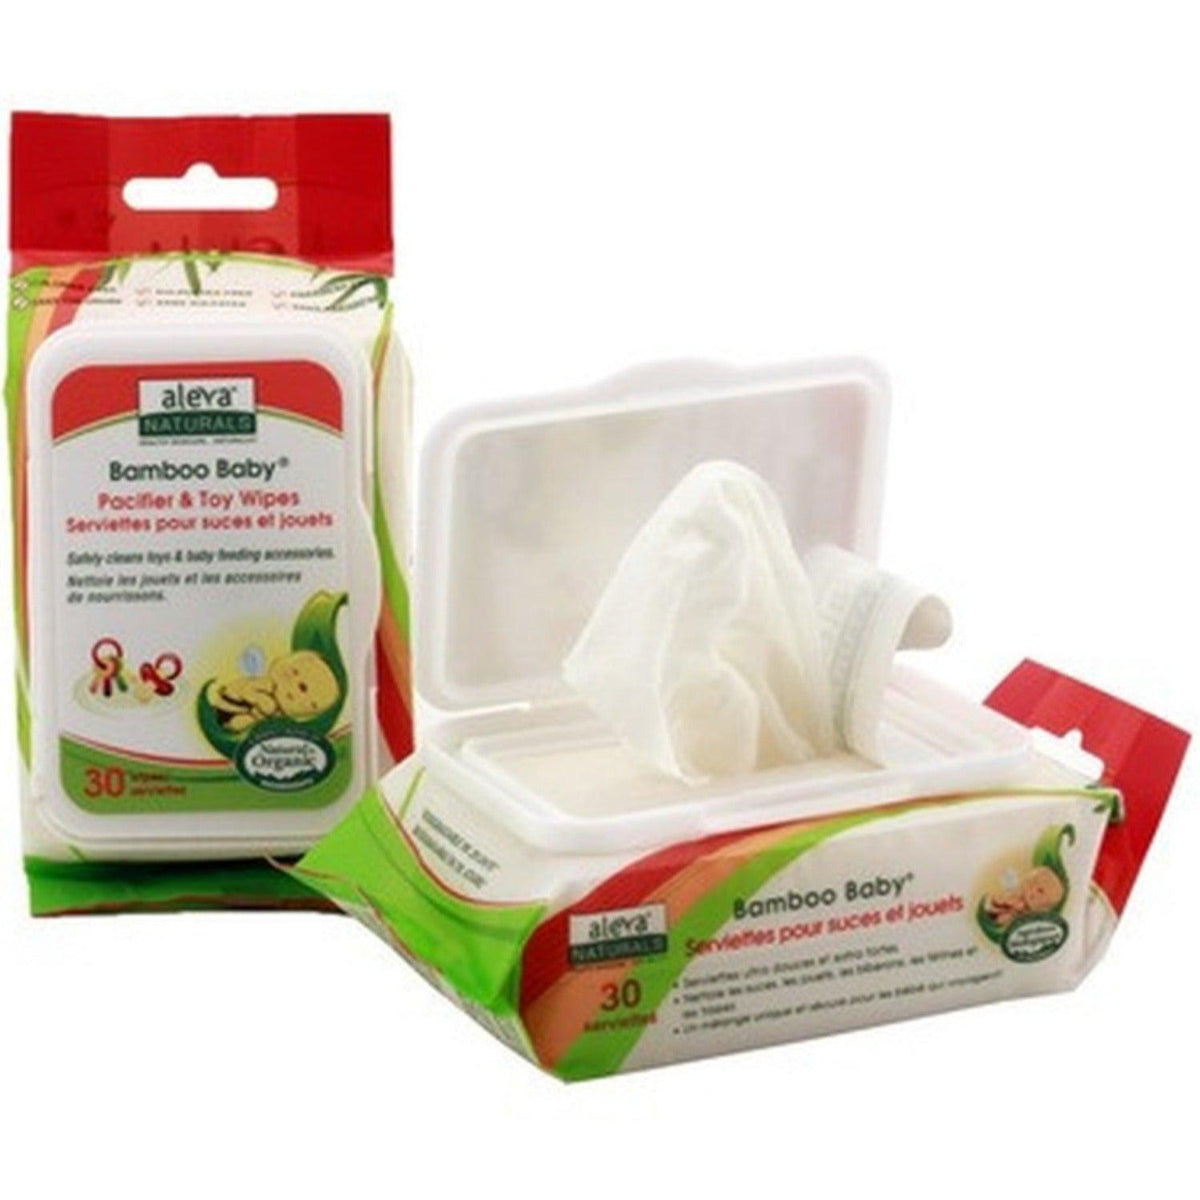 Aleva Naturals - Bamboo Baby Pacifier & Toy Wipes, 30 Wipes Baby & Toddler at Village Vitamin Store